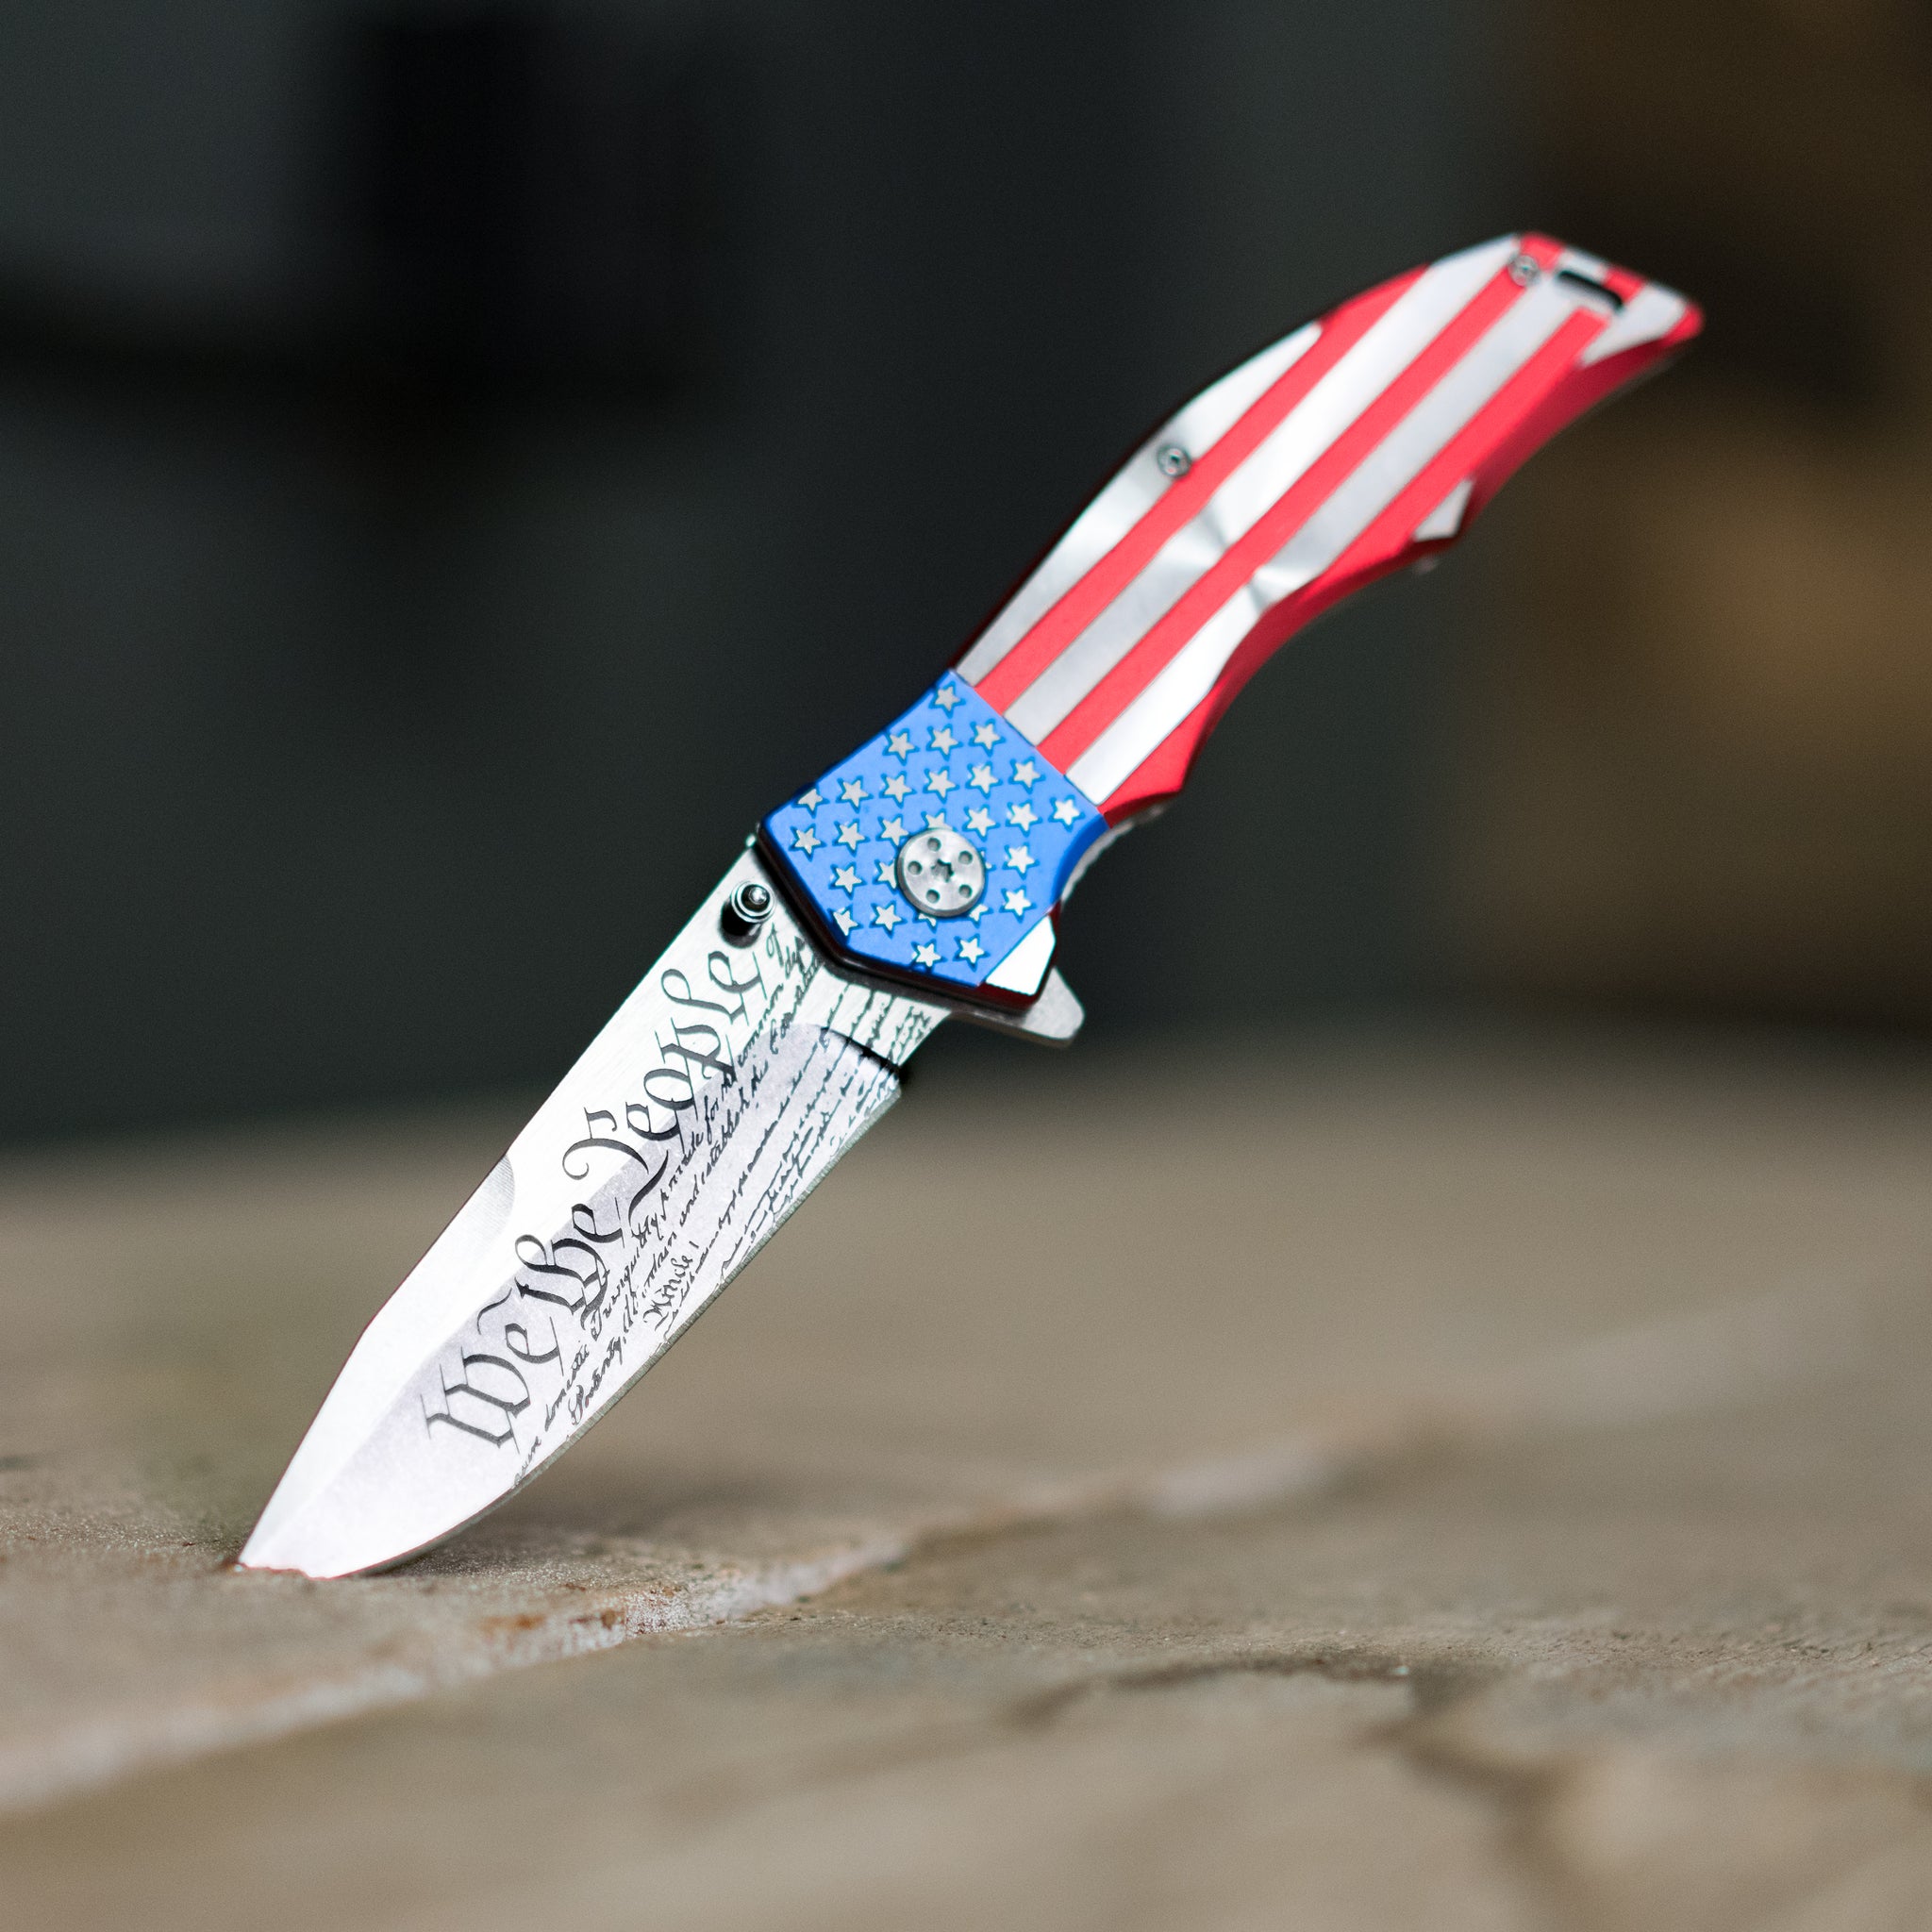 "We The People" Etched Blade Pocket Knife (1 pc)